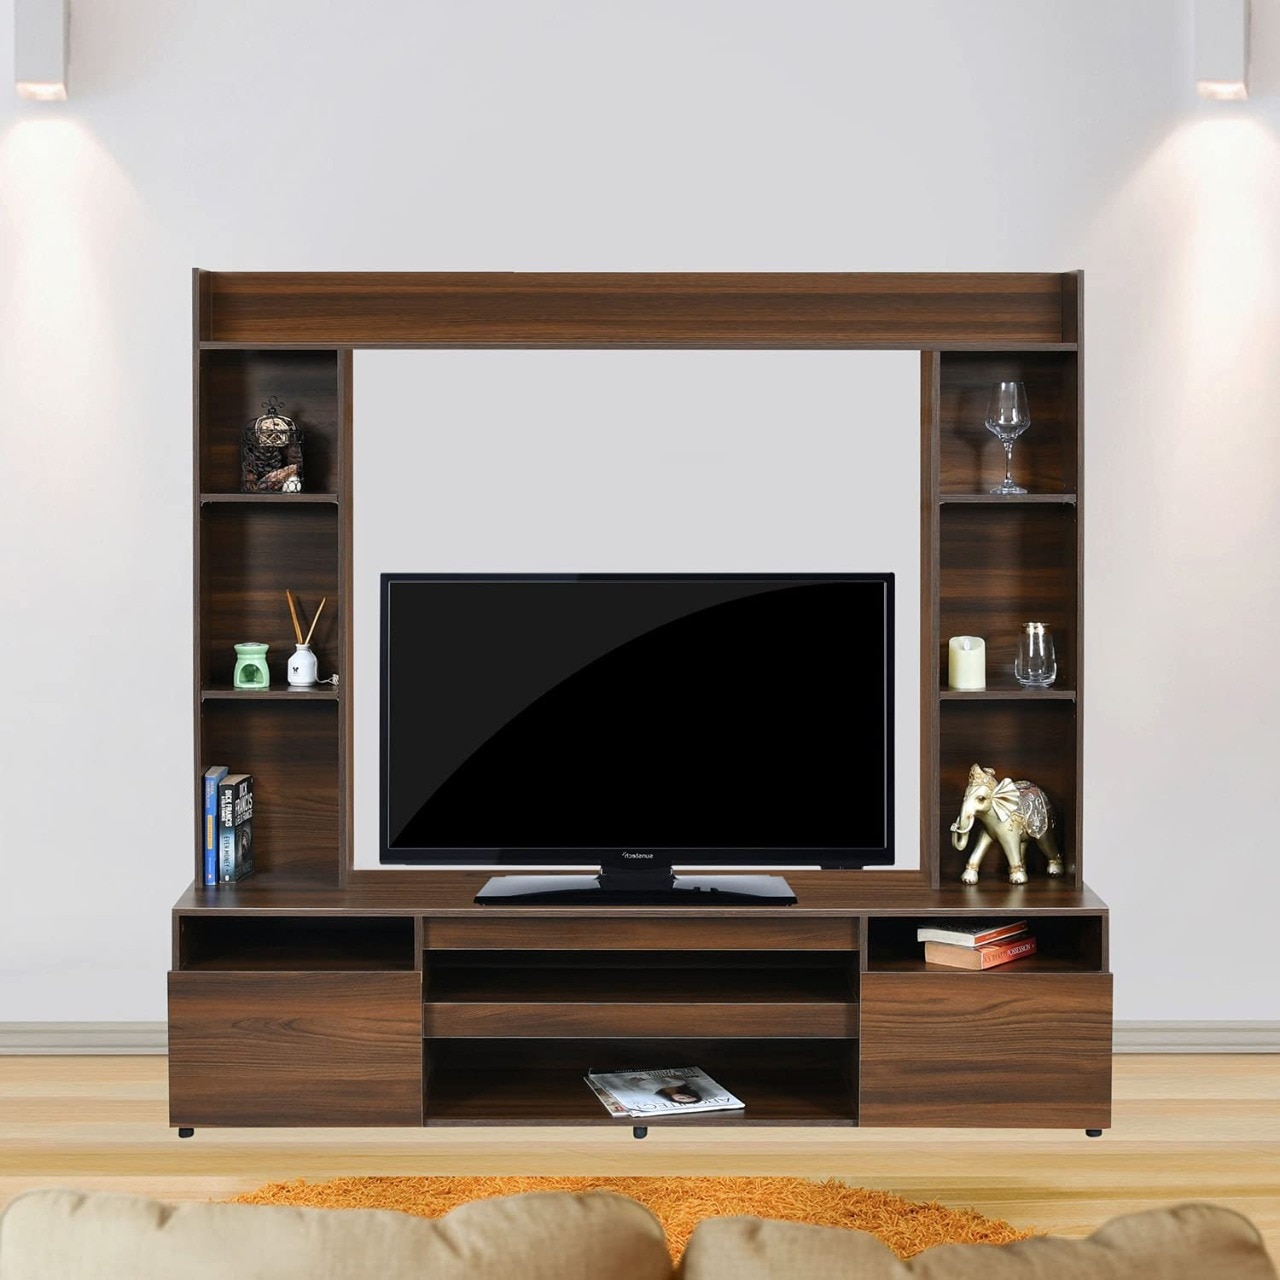 TV Unit On Amazon Best Brand TV Cabinet Hometown TV Cabinet Home ...